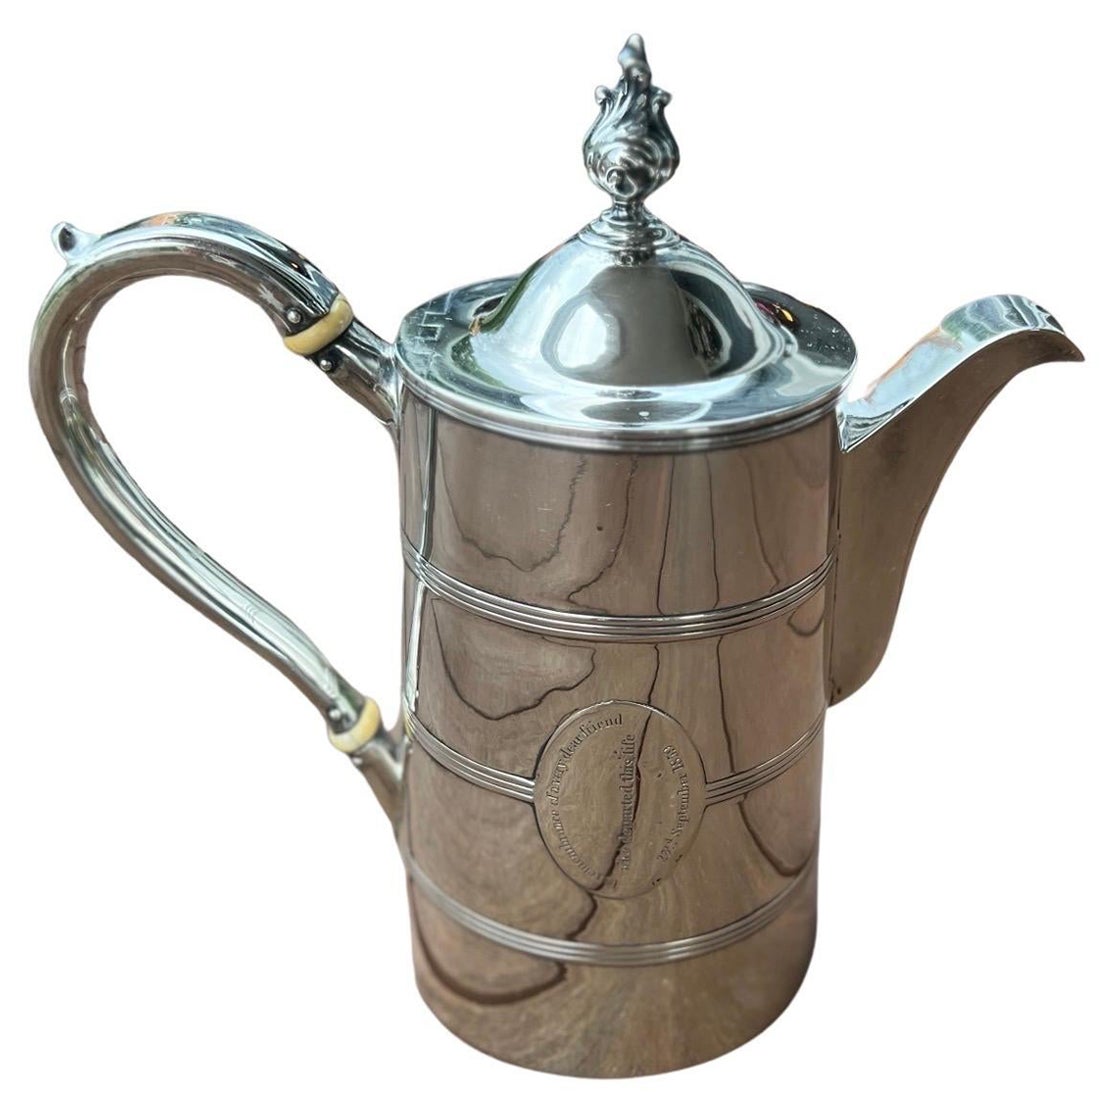 Henry Chawner Antique George III Sterling Silver Teapot Circa 1794 For Sale